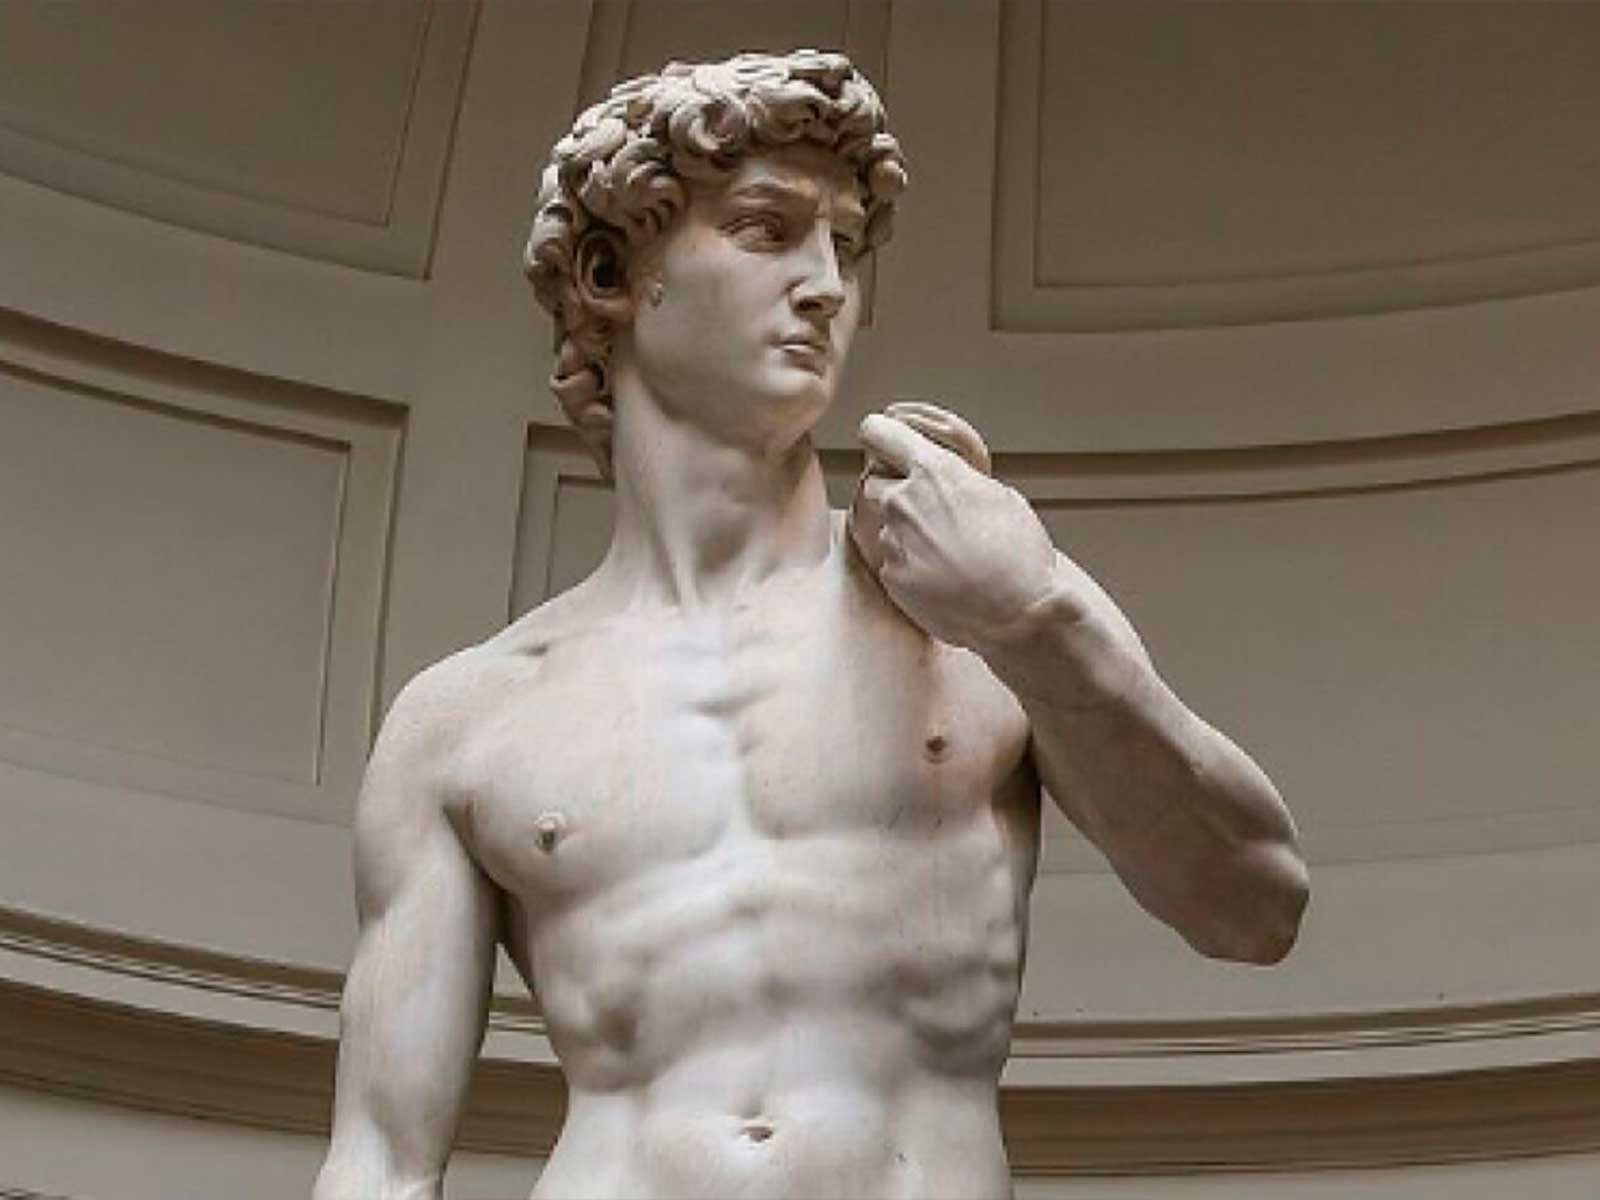 School principal expelled for showing Michelangelo’s David to students